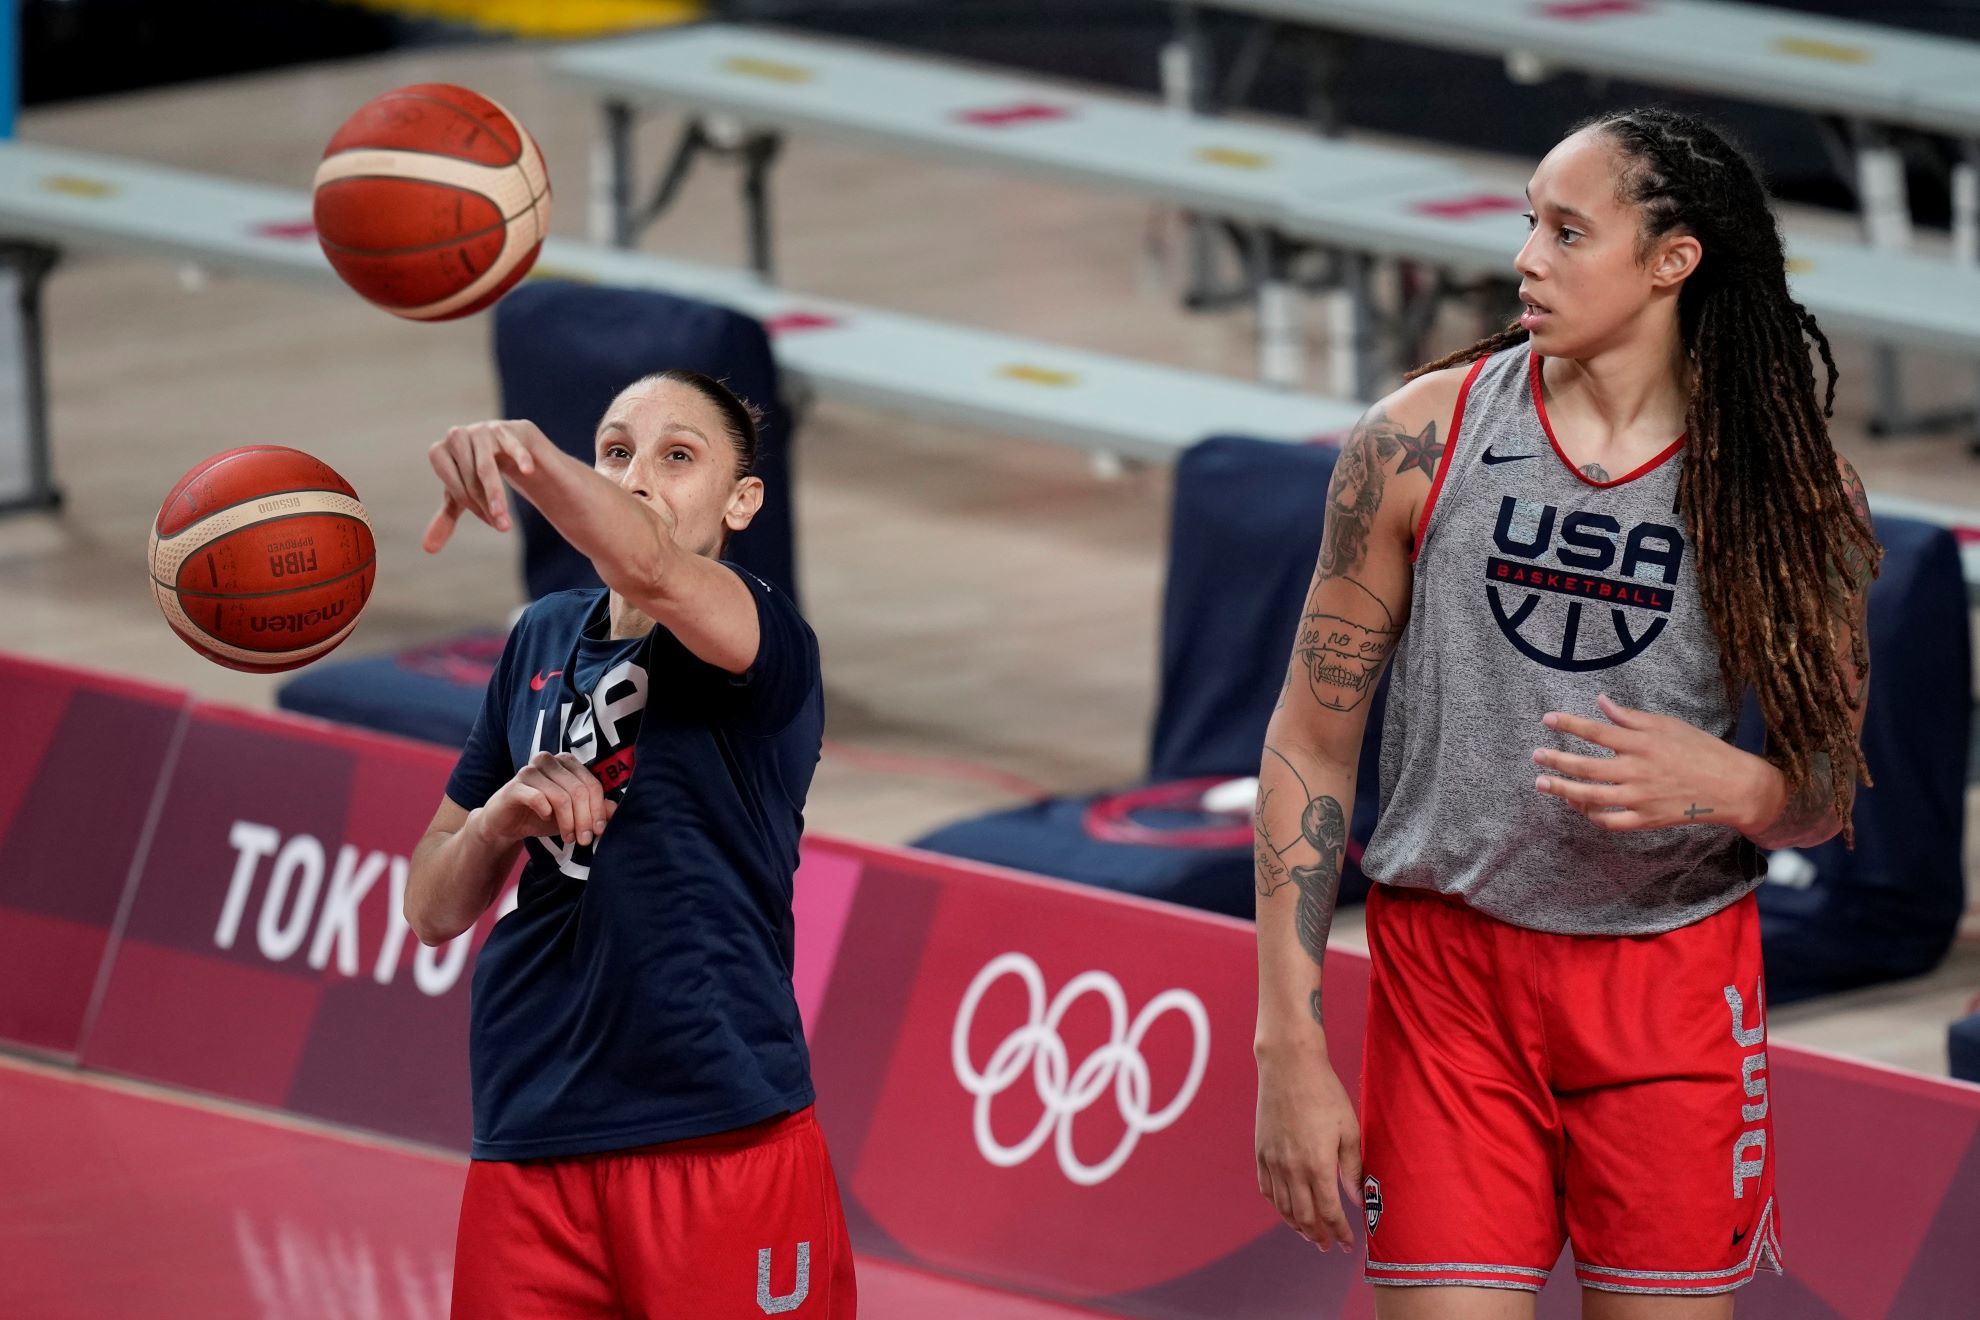 United States' Diana Taurasi, left, and Brittney Griner tale part in a women's basketball practice.